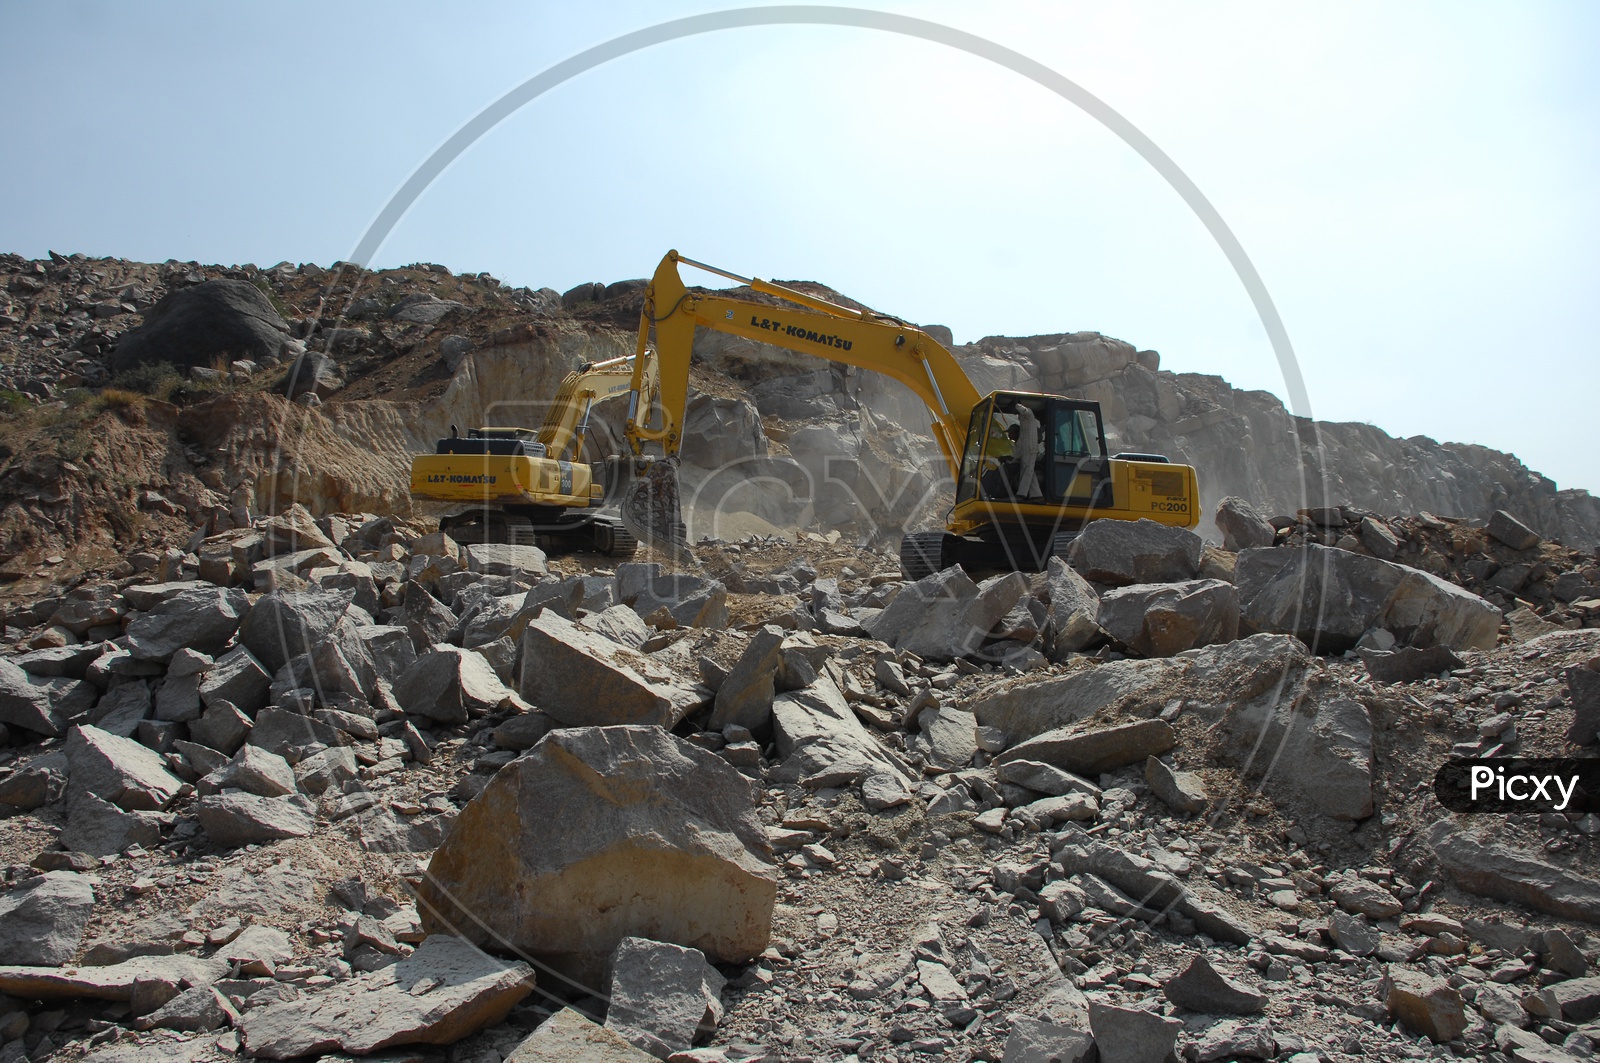 Bulldozer quarrying the construction rocks at an excavation site